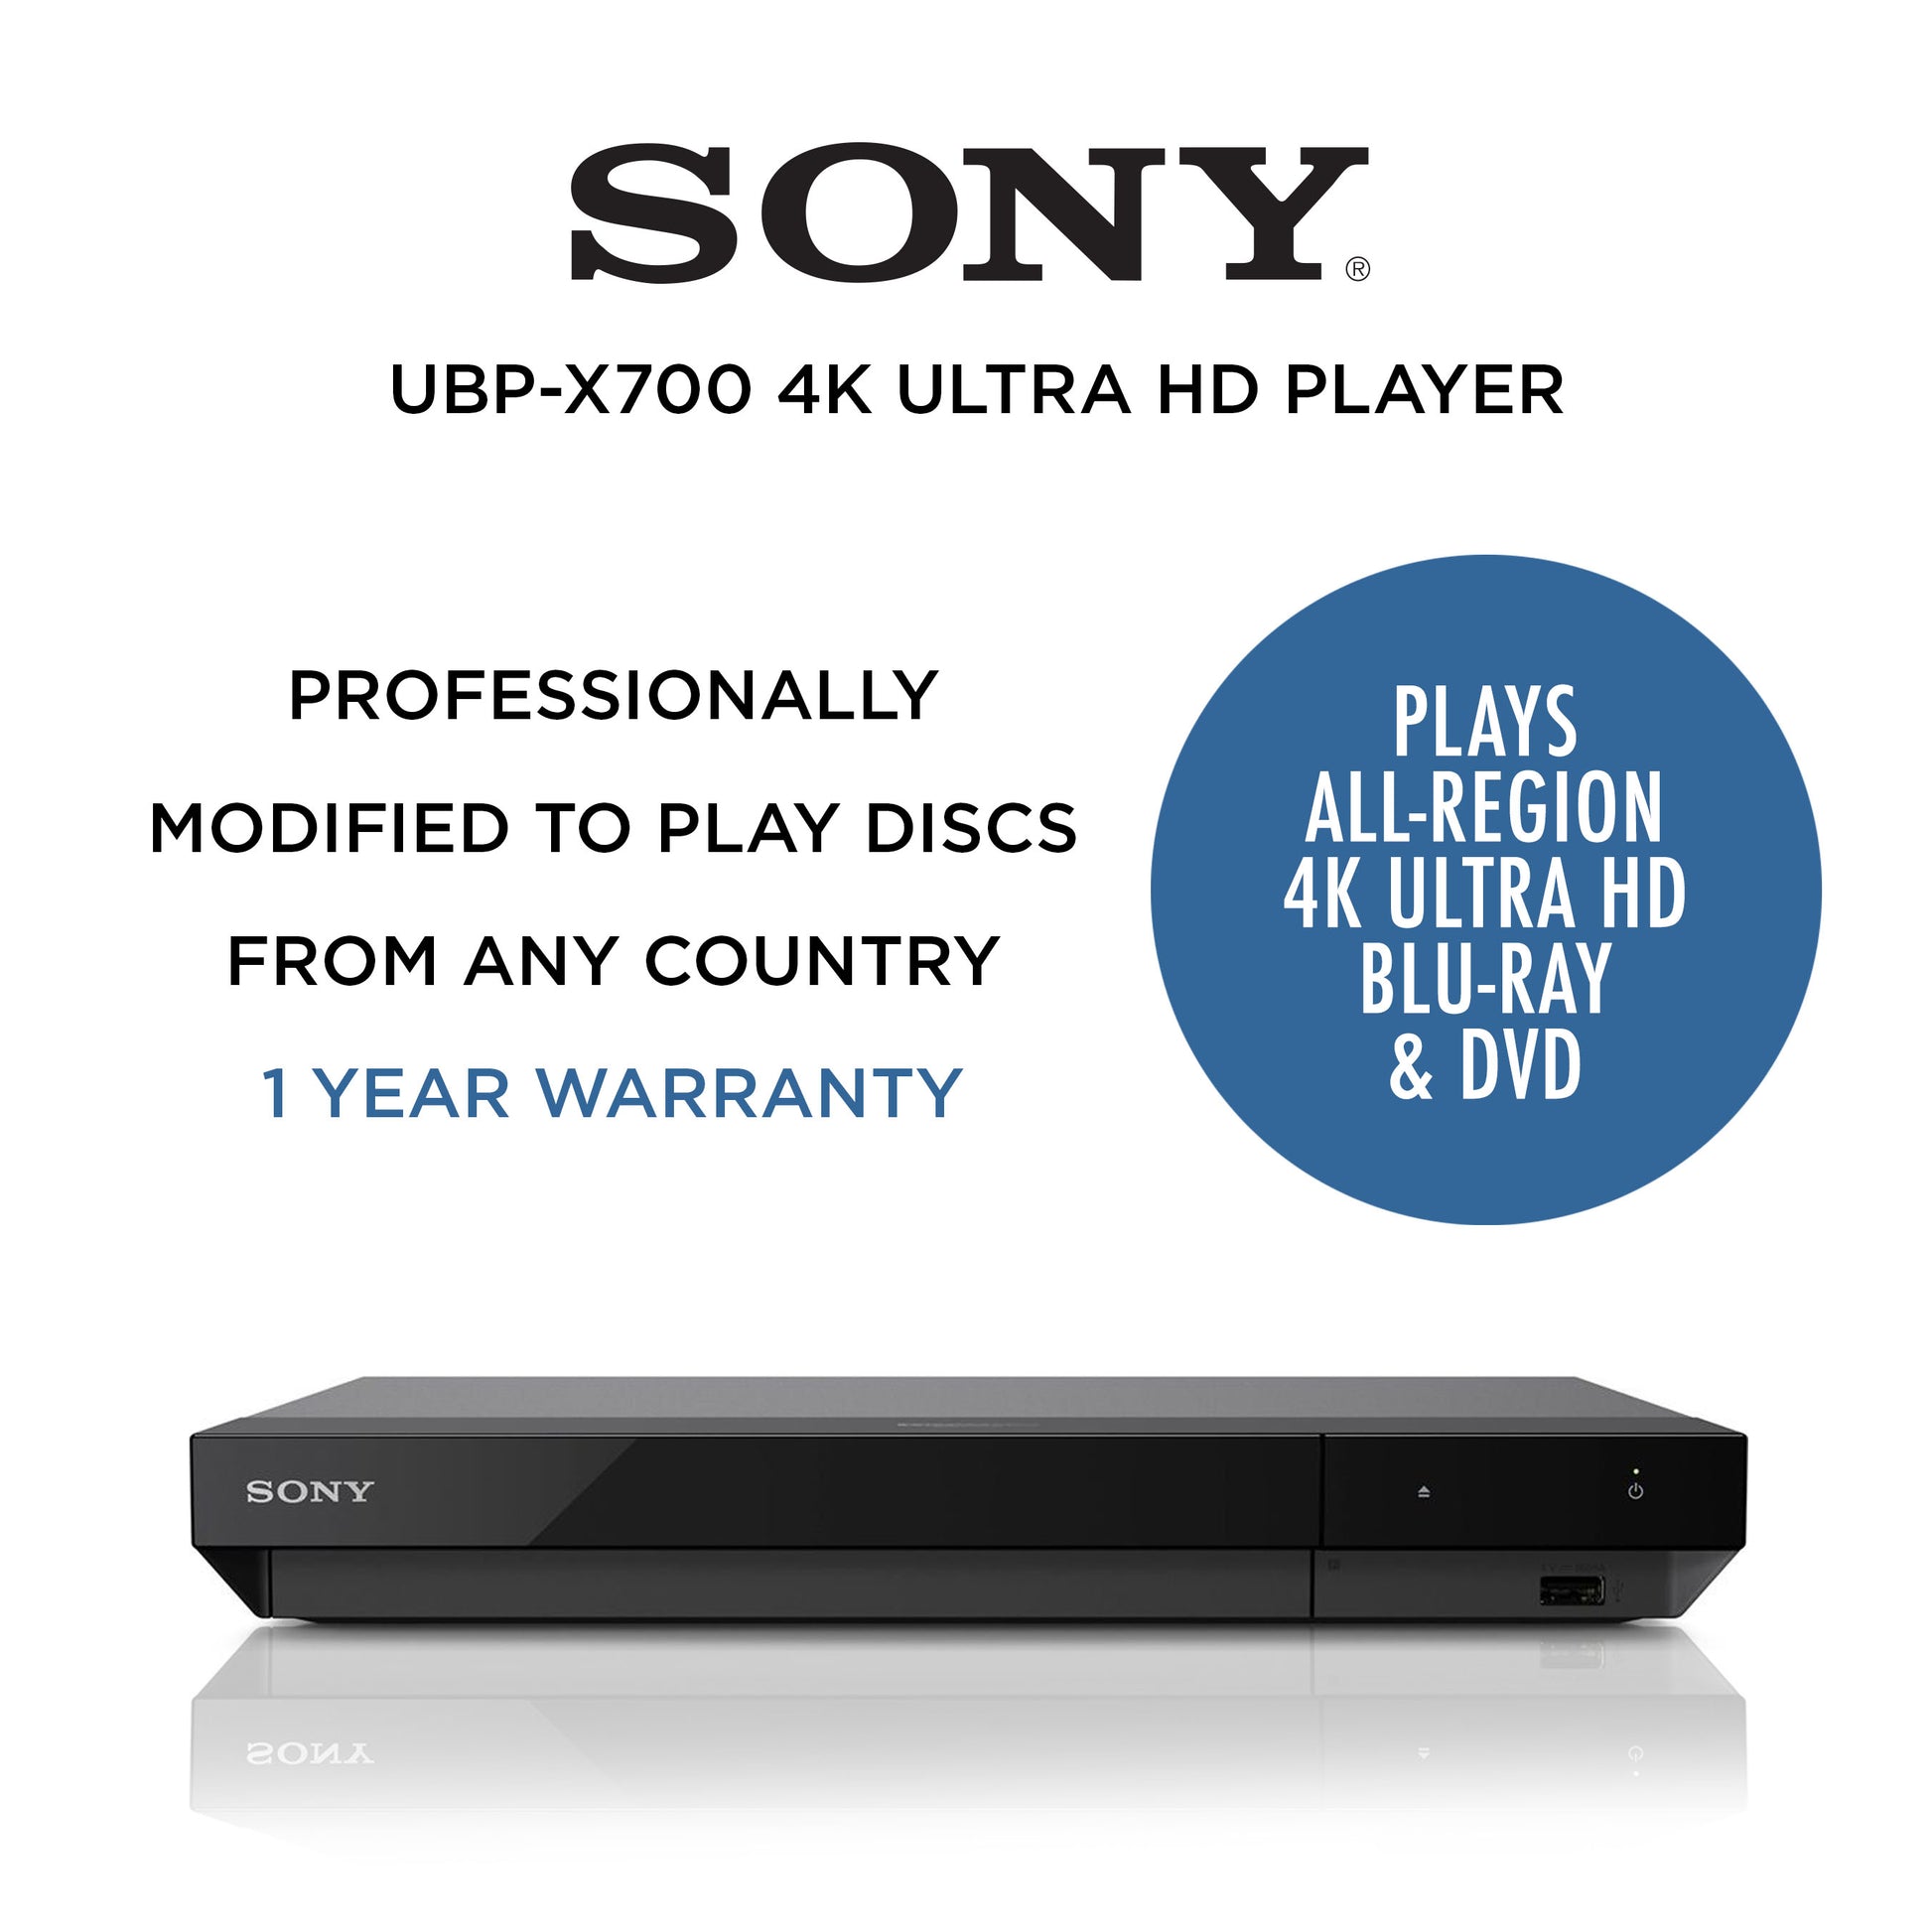 Sony UBP-X700 4K Ultra HD Home Theater Streaming Blu-ray DVD Player with  Wi-Fi, 4K upscaling, HDR10, Hi Res Audio, Dolby Digital TrueHD /DTS, and  Dolby Vision 